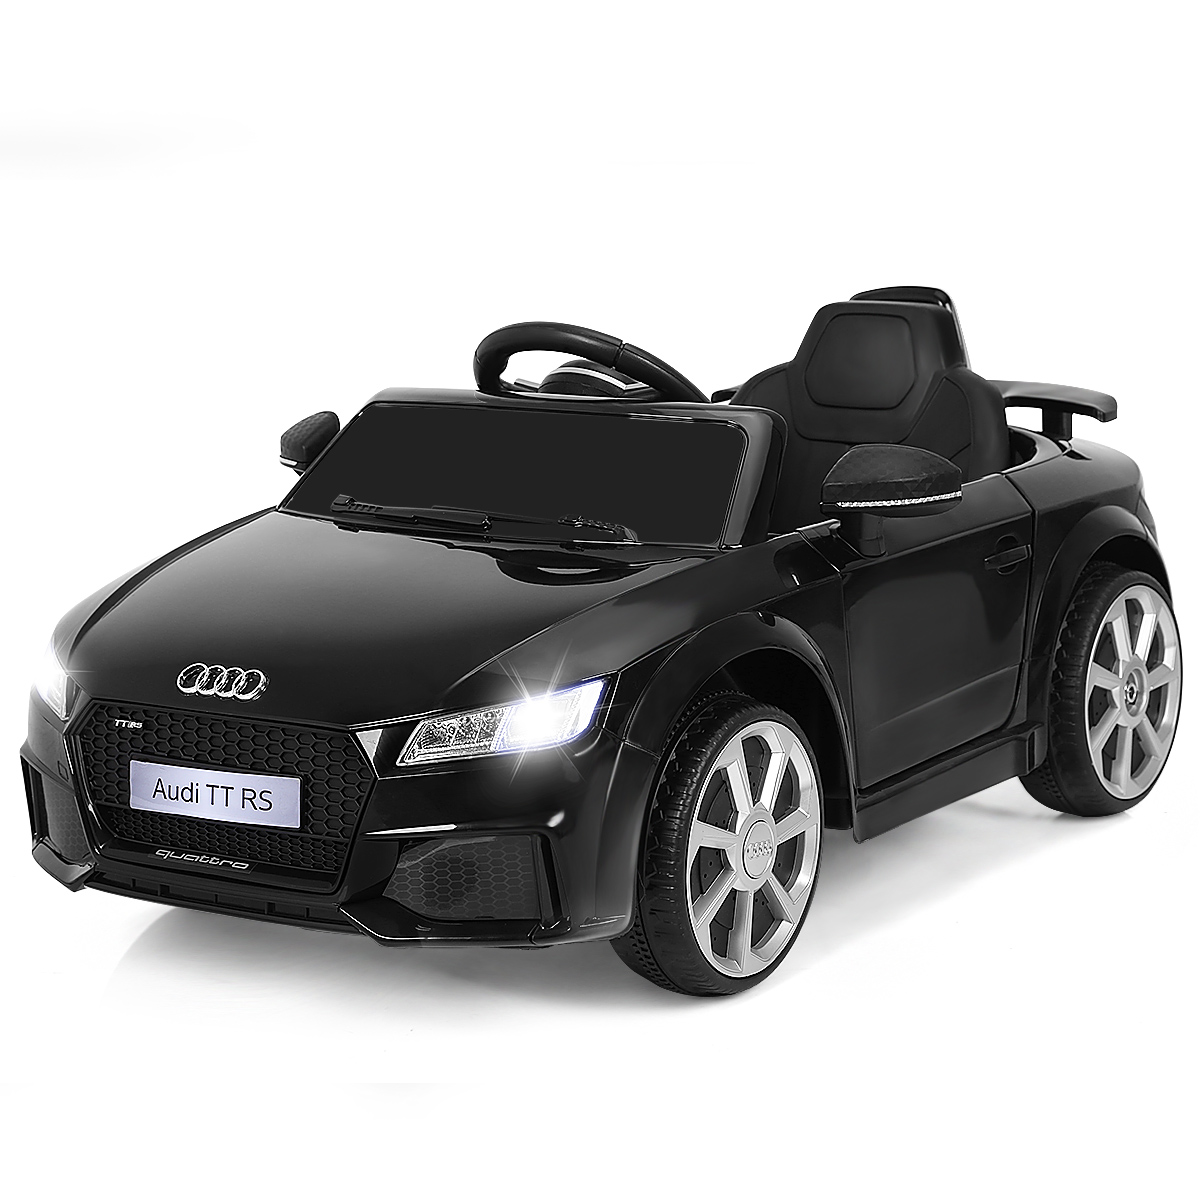 Licensed Audi TTRS 12V Battery-Powered Vehicle with 2 Motors MP3 music-Black